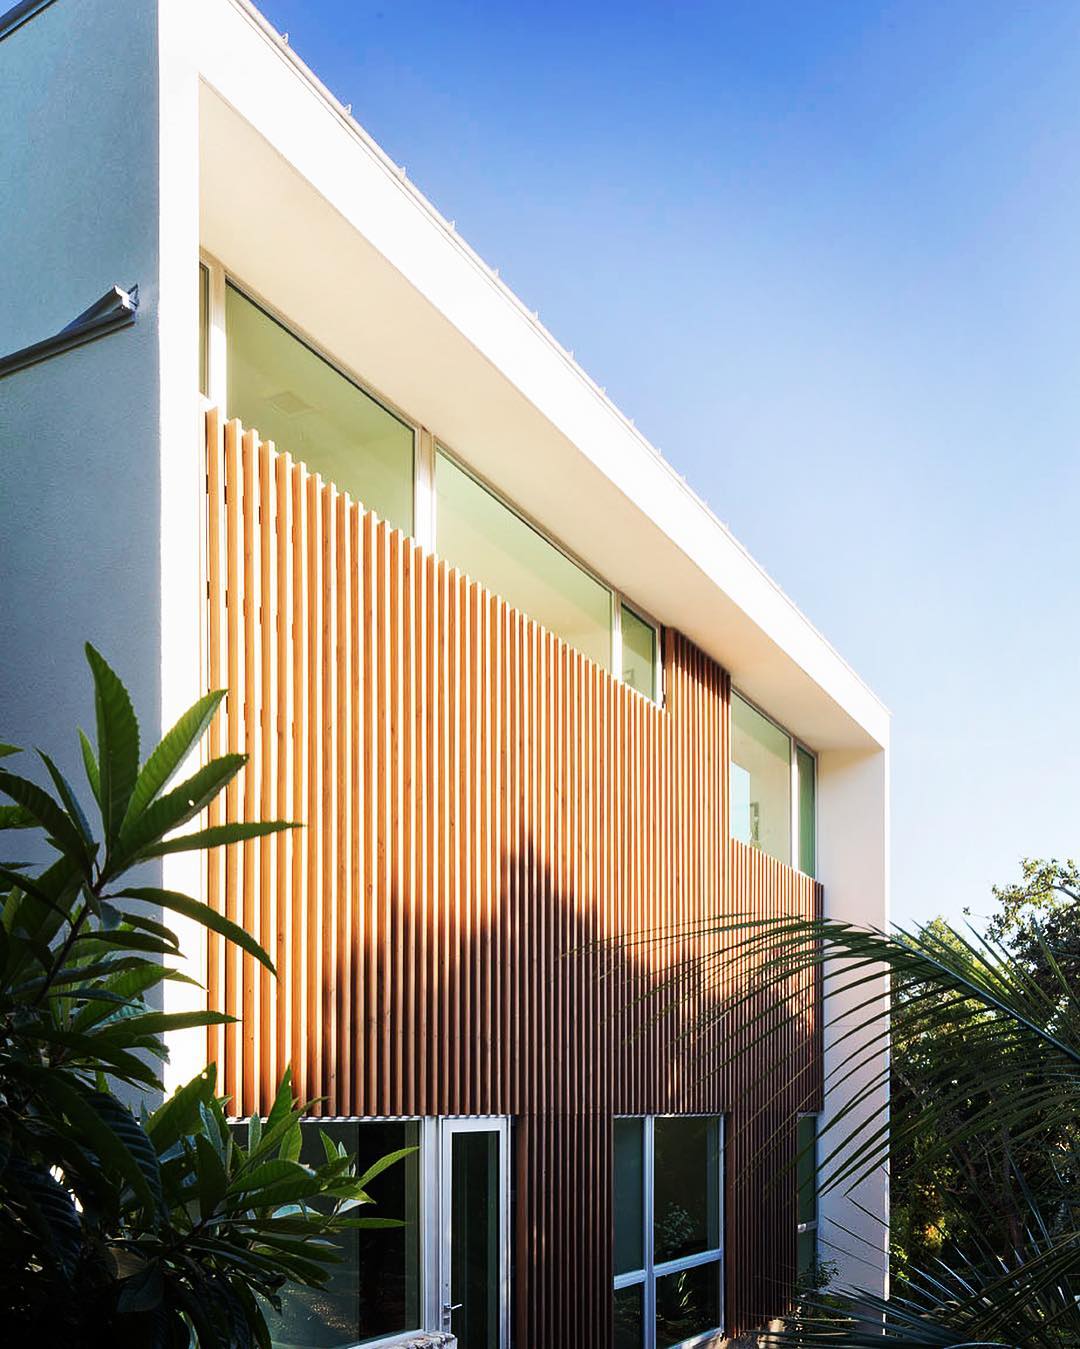 Douglas Fir provides texture and warmth to this @webberstudio designed home. Built by @foursquarebuilders